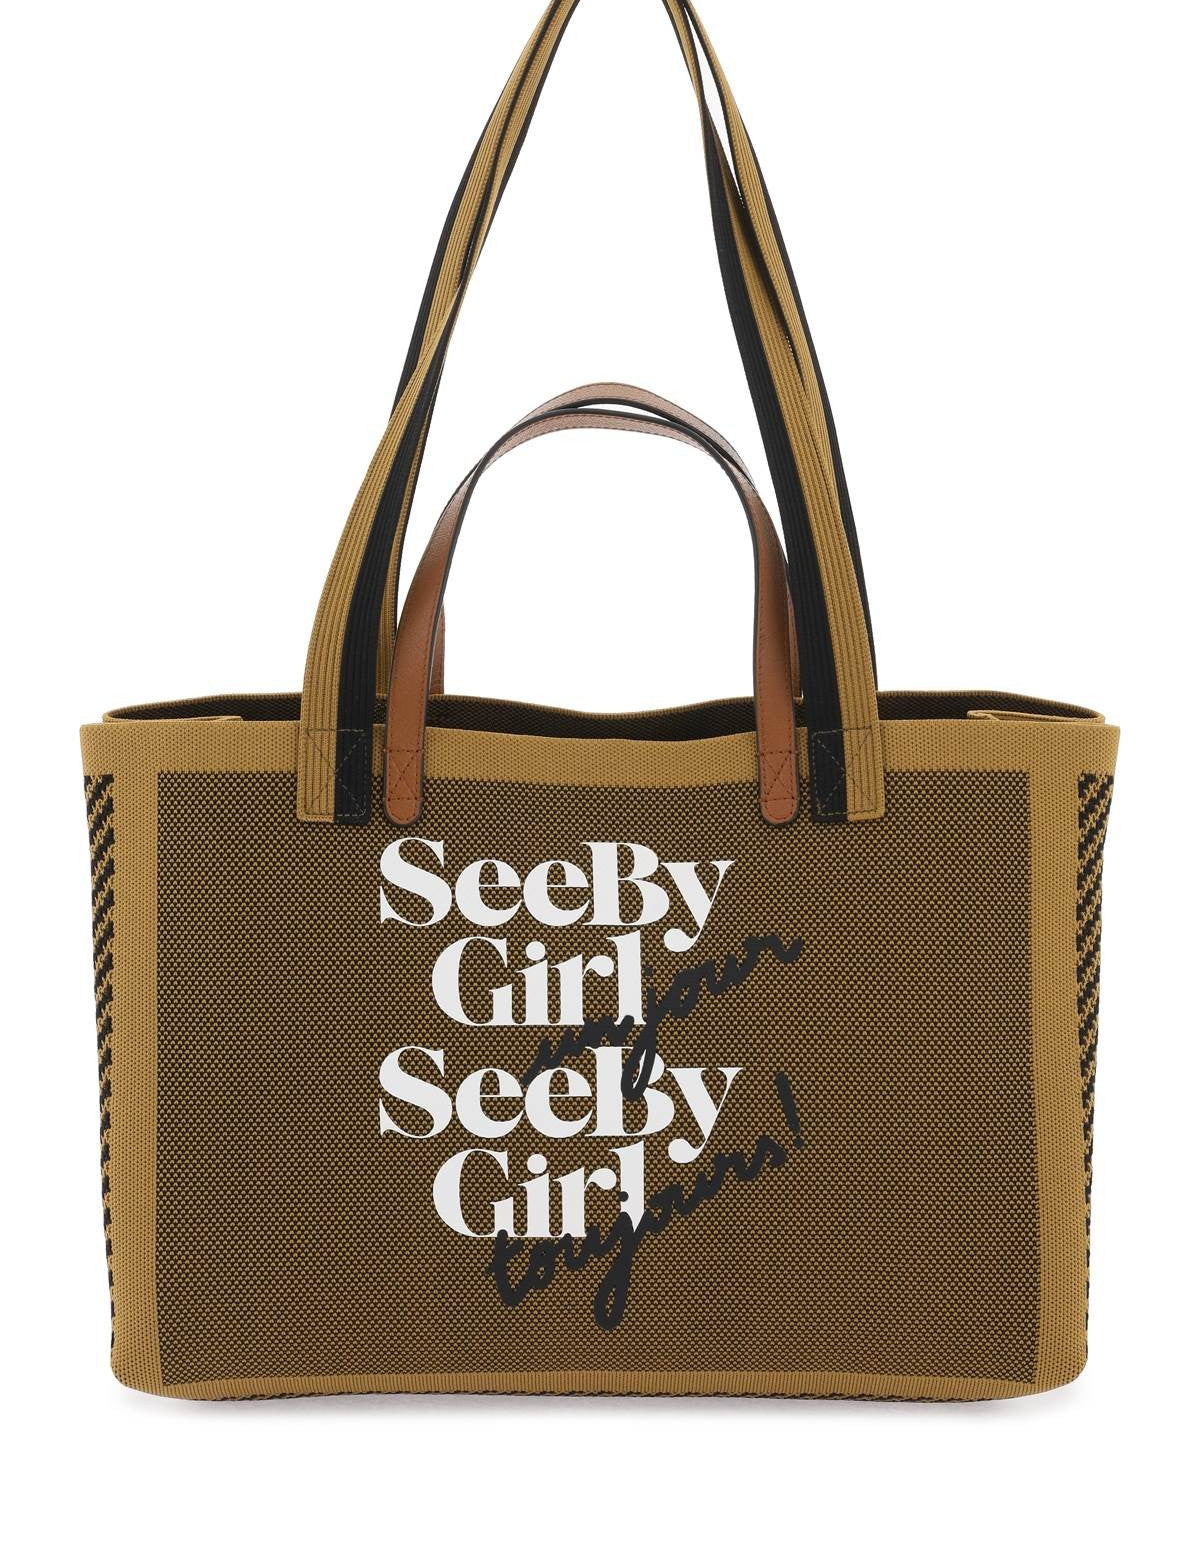 see-by-chloe-see-by-girl-un-jour-tote.jpg